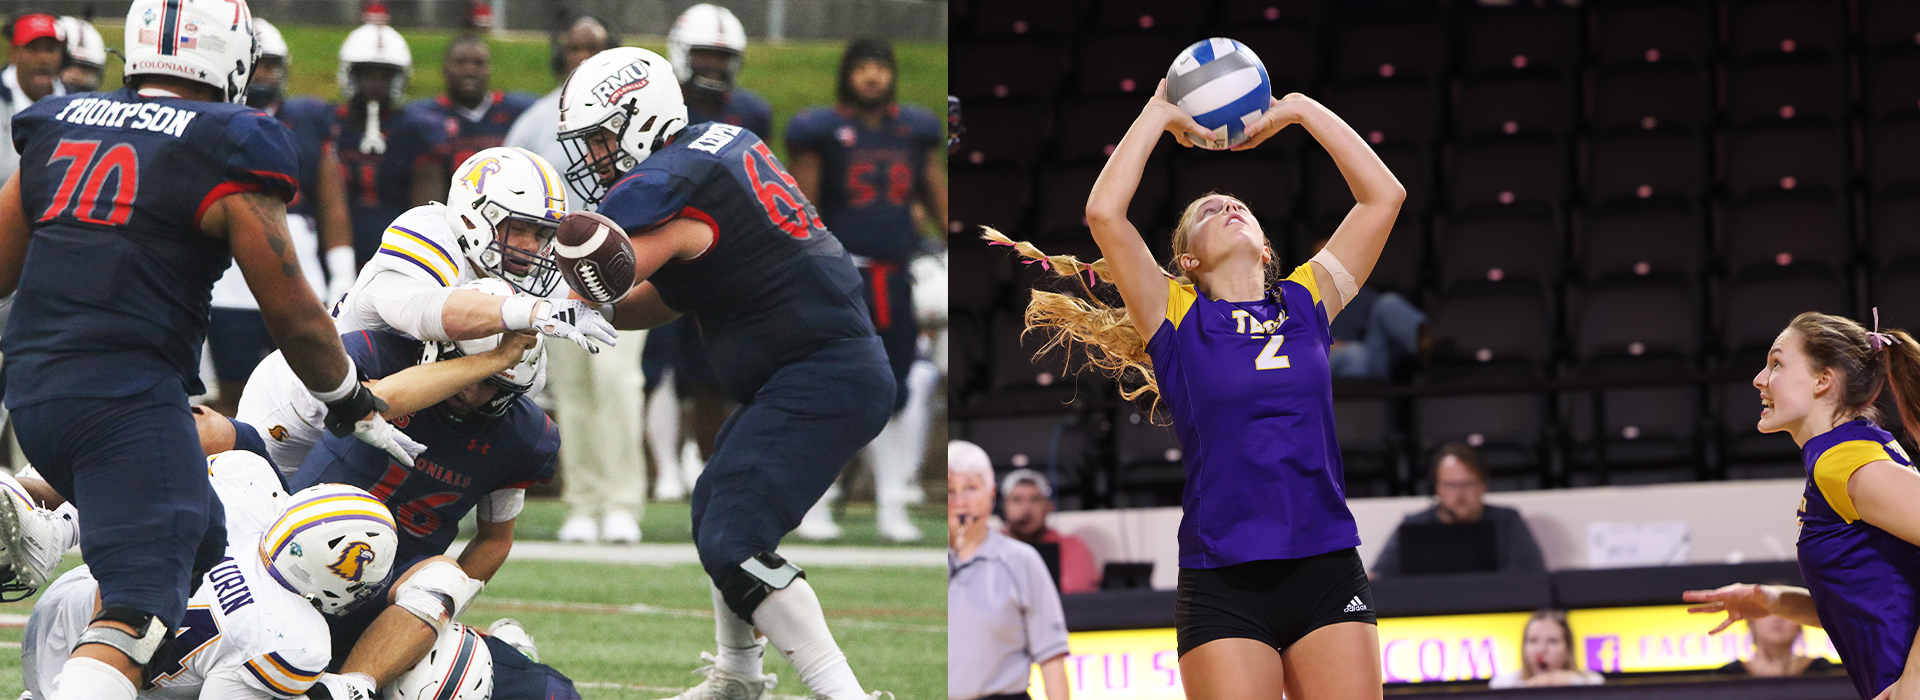 Football's Rickert, Volleyball's Karlen named TSWA College Players of the Week